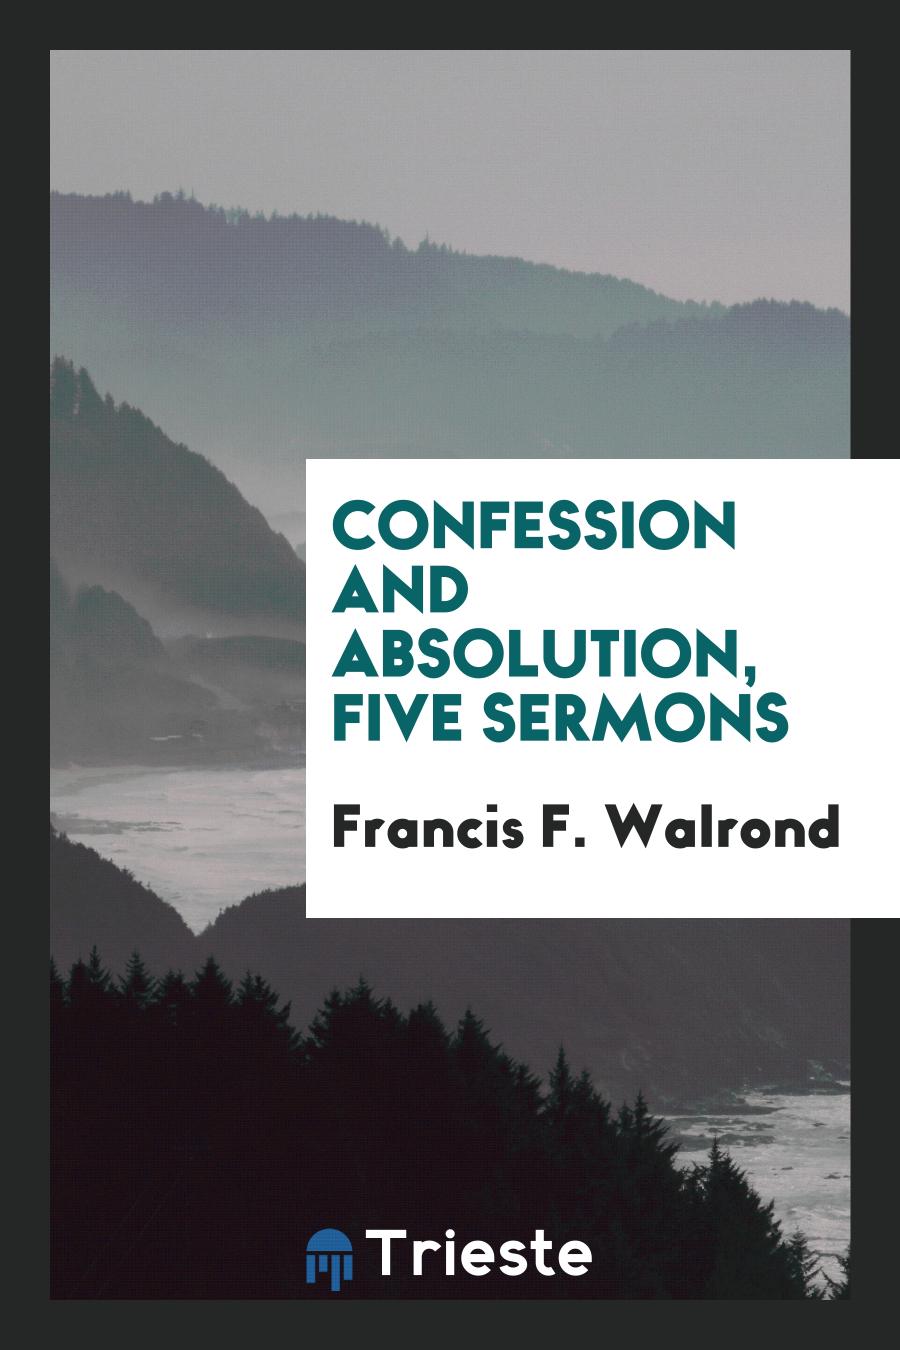 Confession and absolution, five sermons